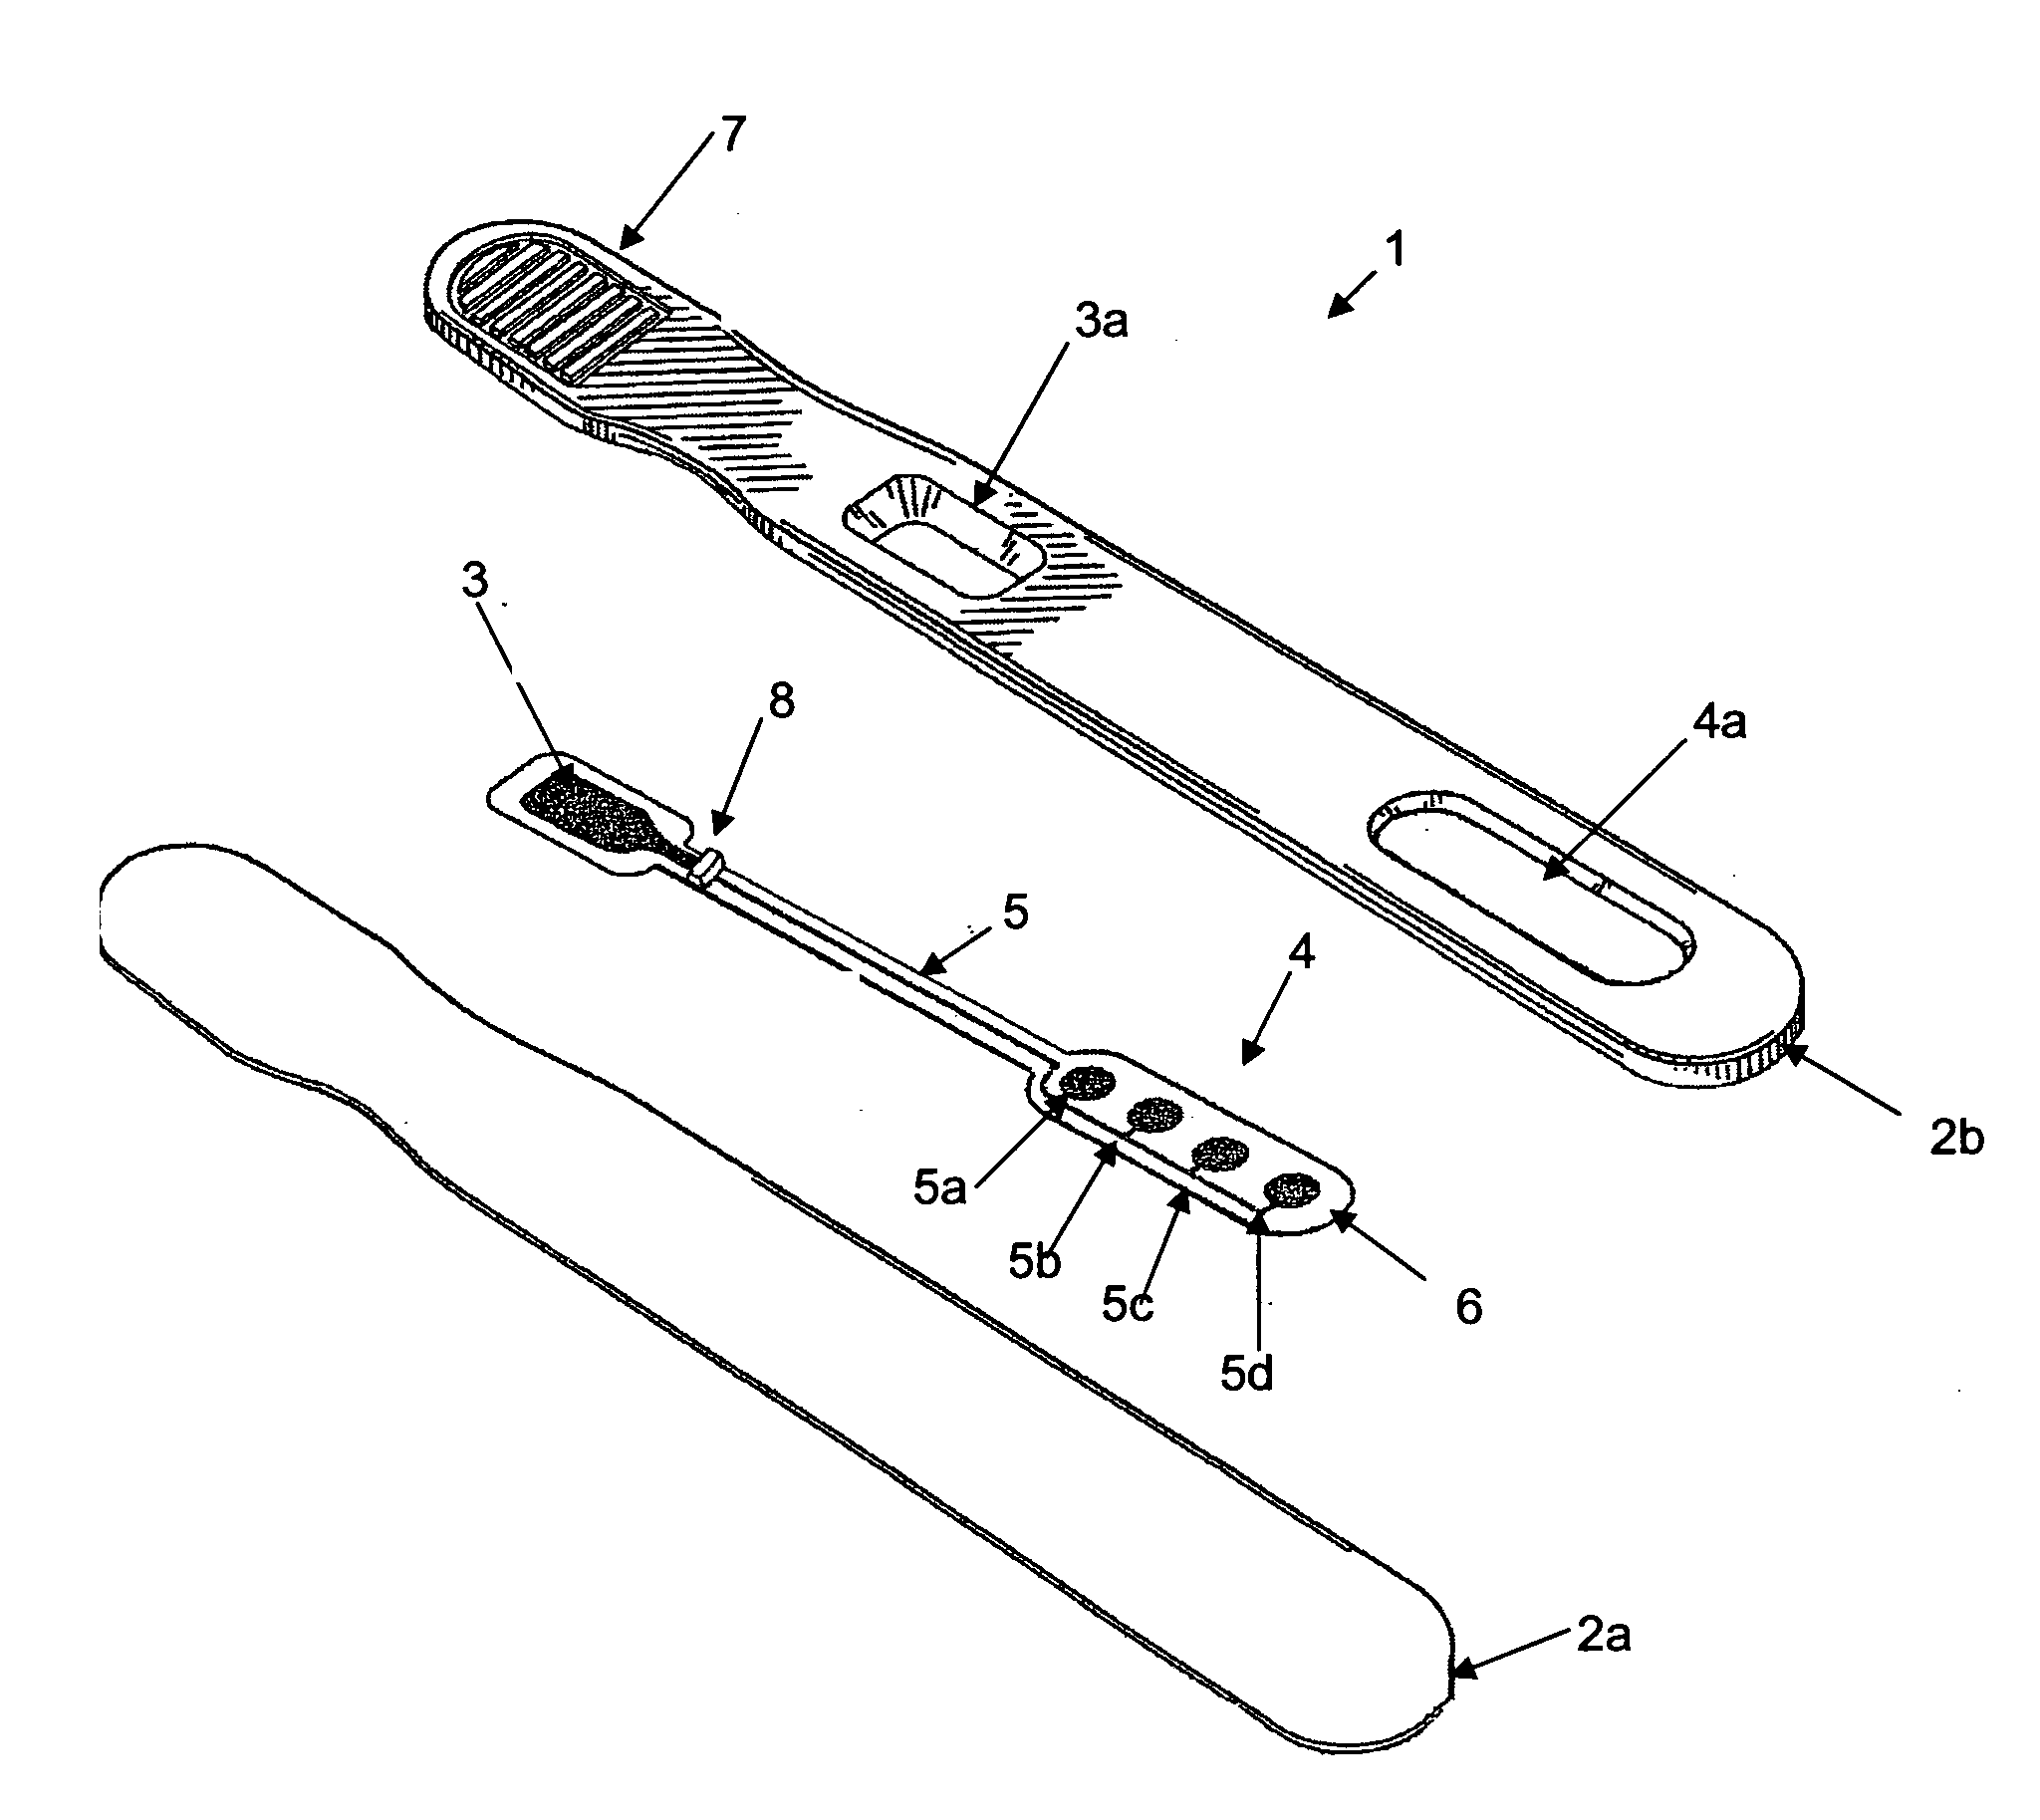 Assay device and methods